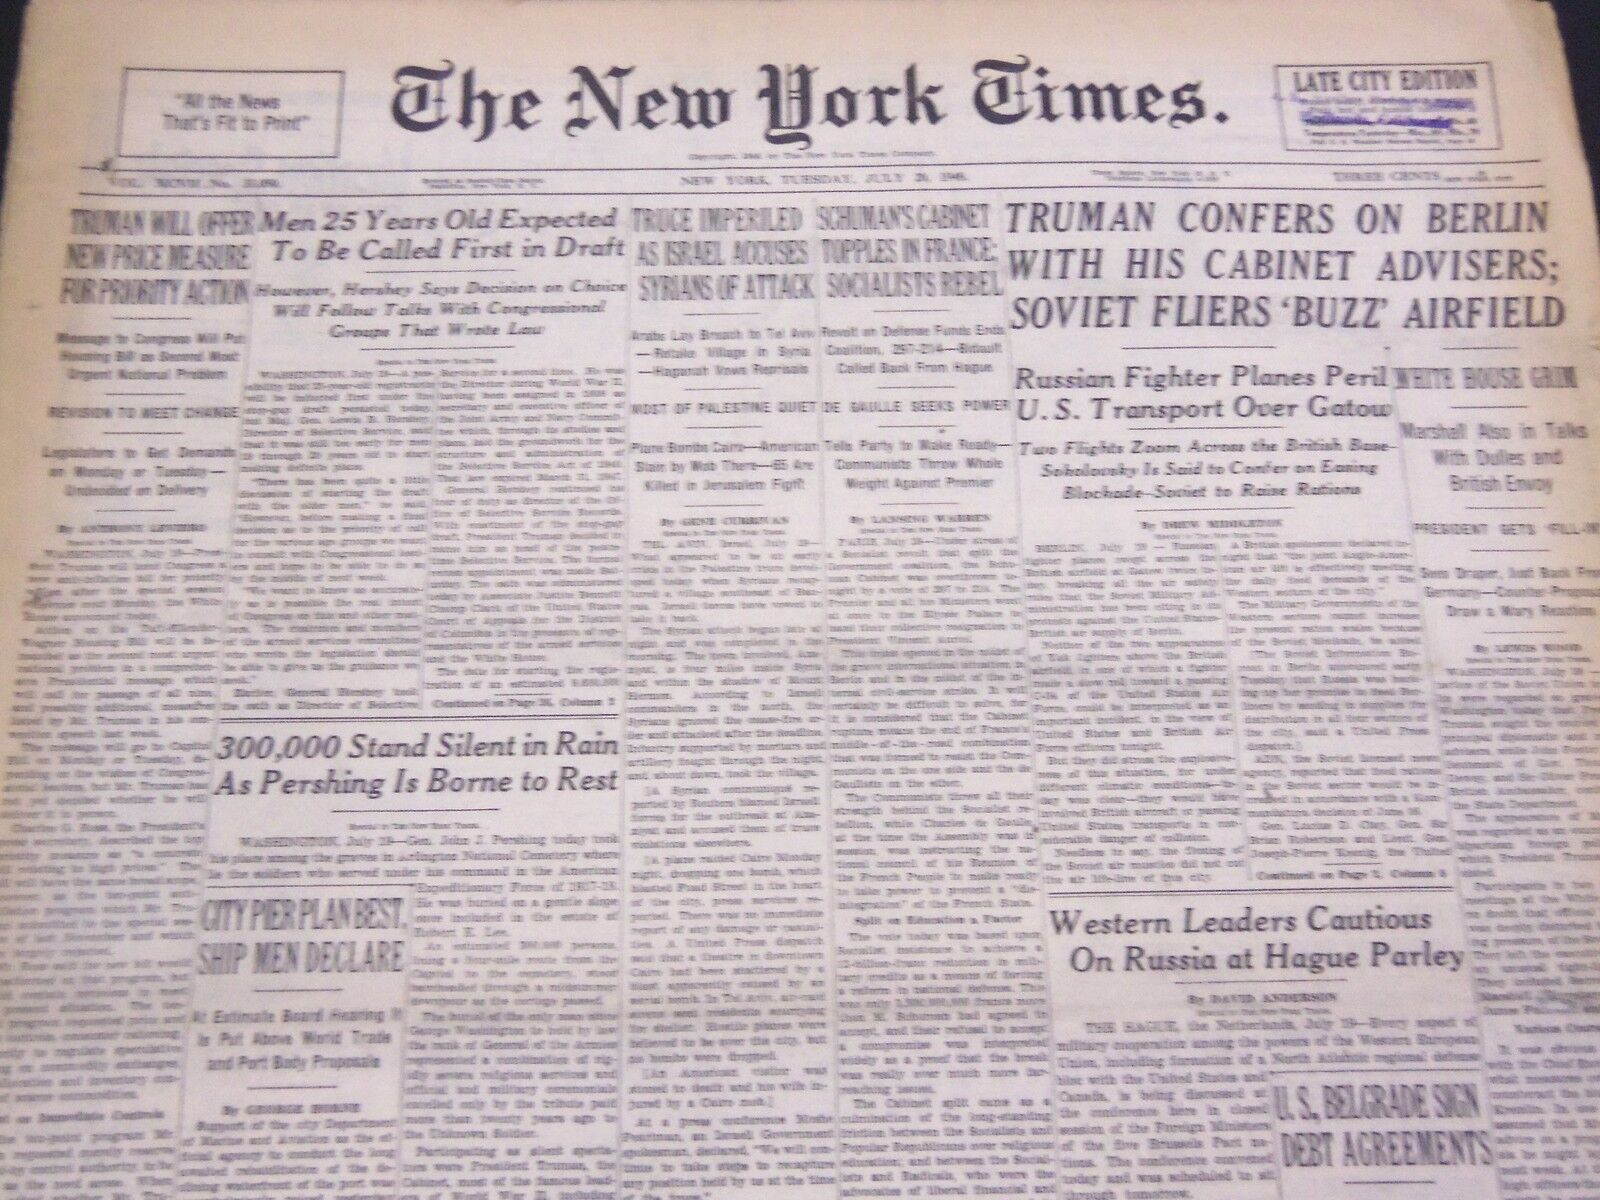 1948 JULY 20 NEW YORK TIMES - ISRAEL ACCUSES SYRIANS OF ATTACK - NT 4417